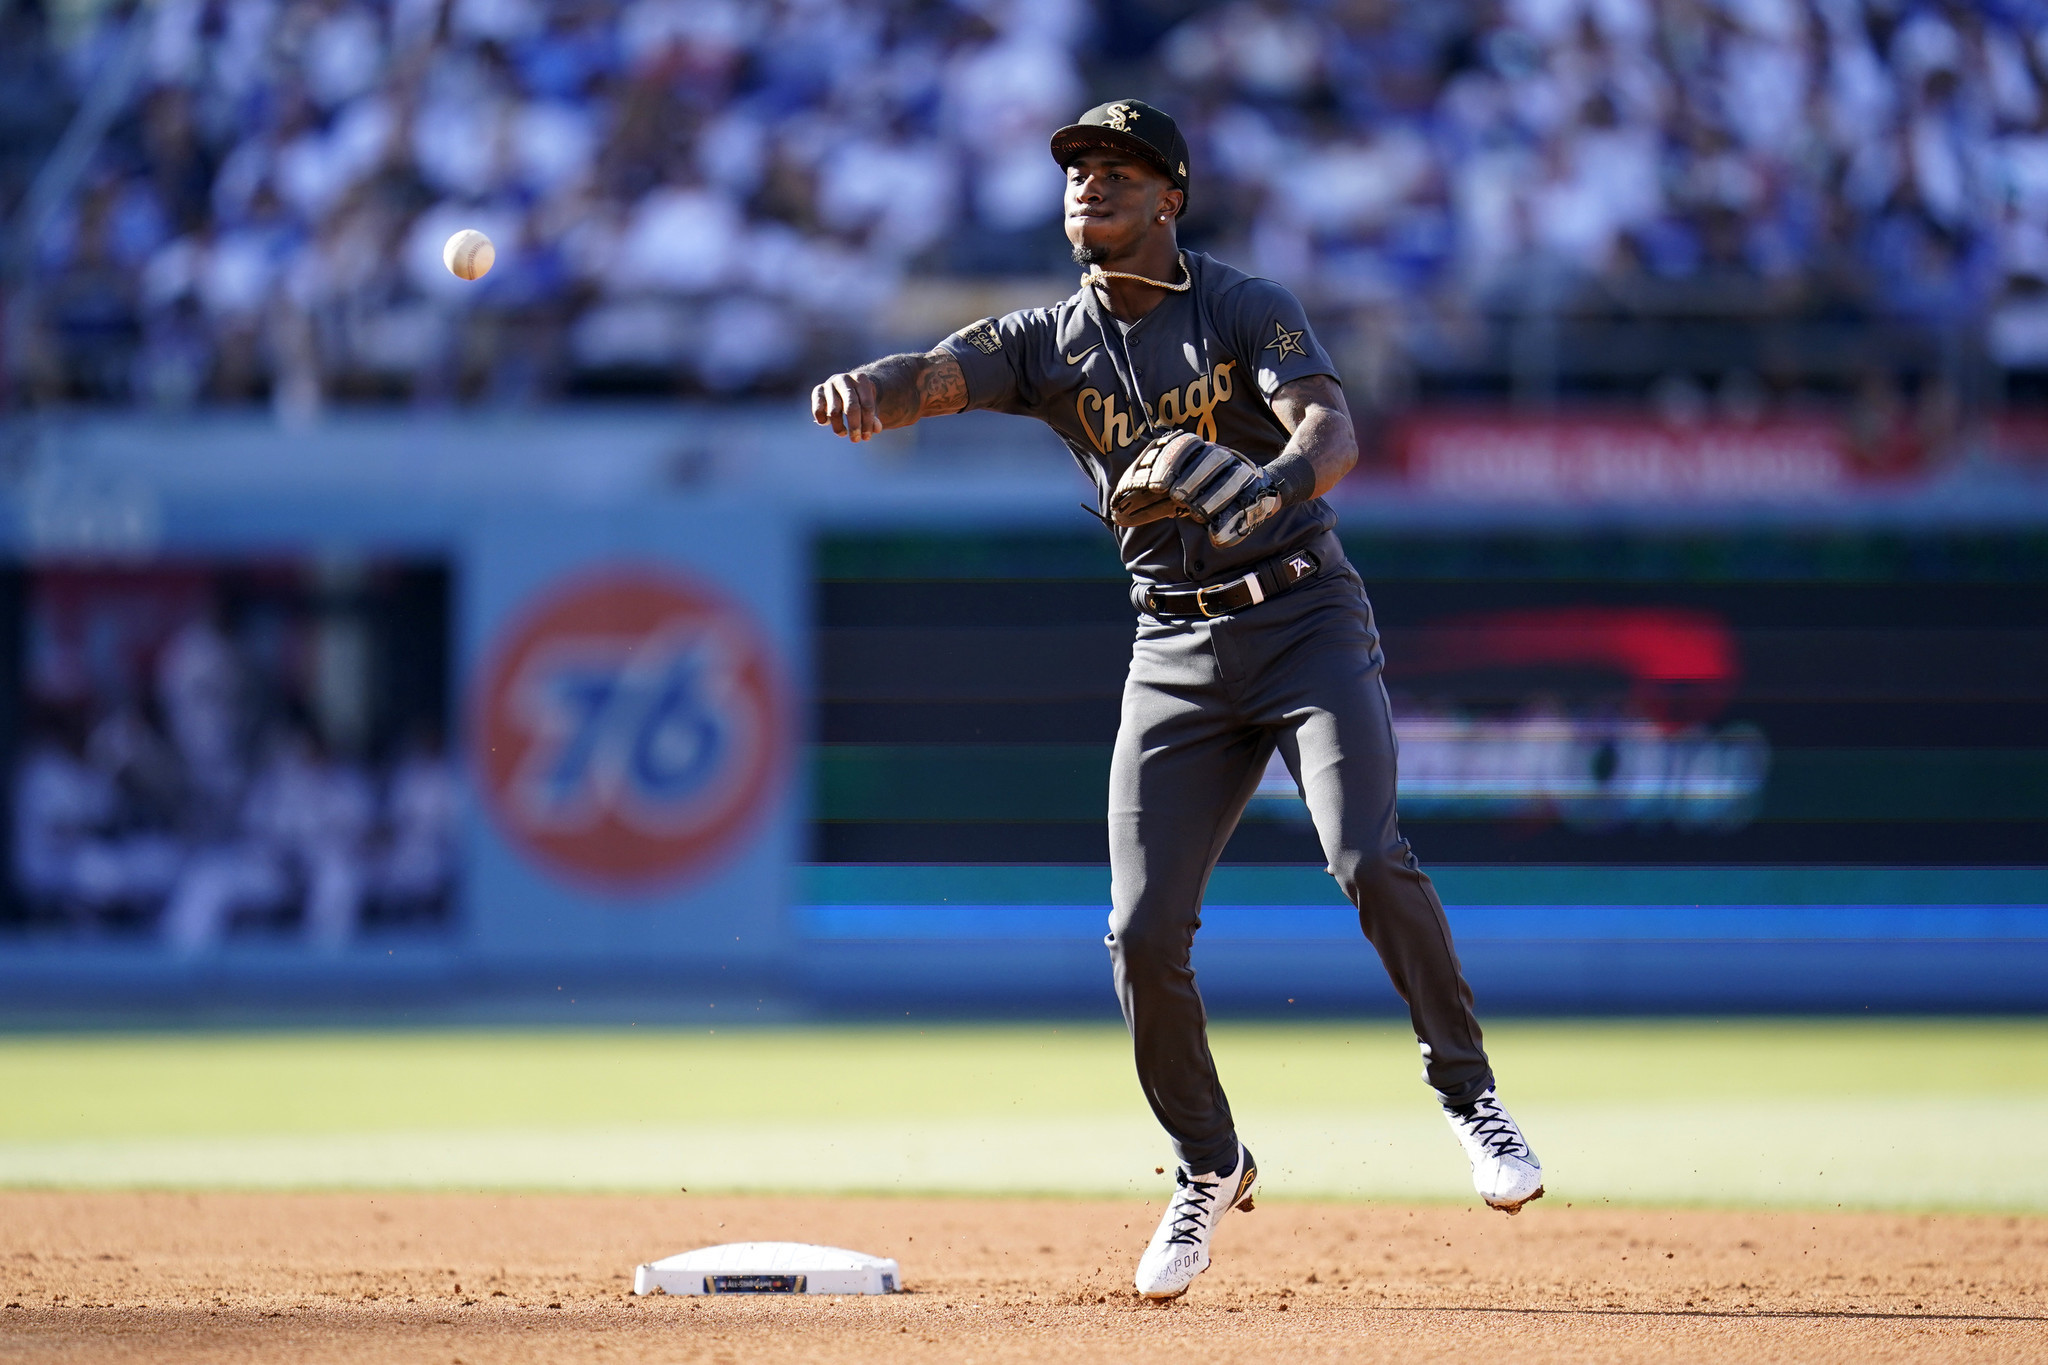 The Chicago White Sox are expecting Tim Anderson back soon